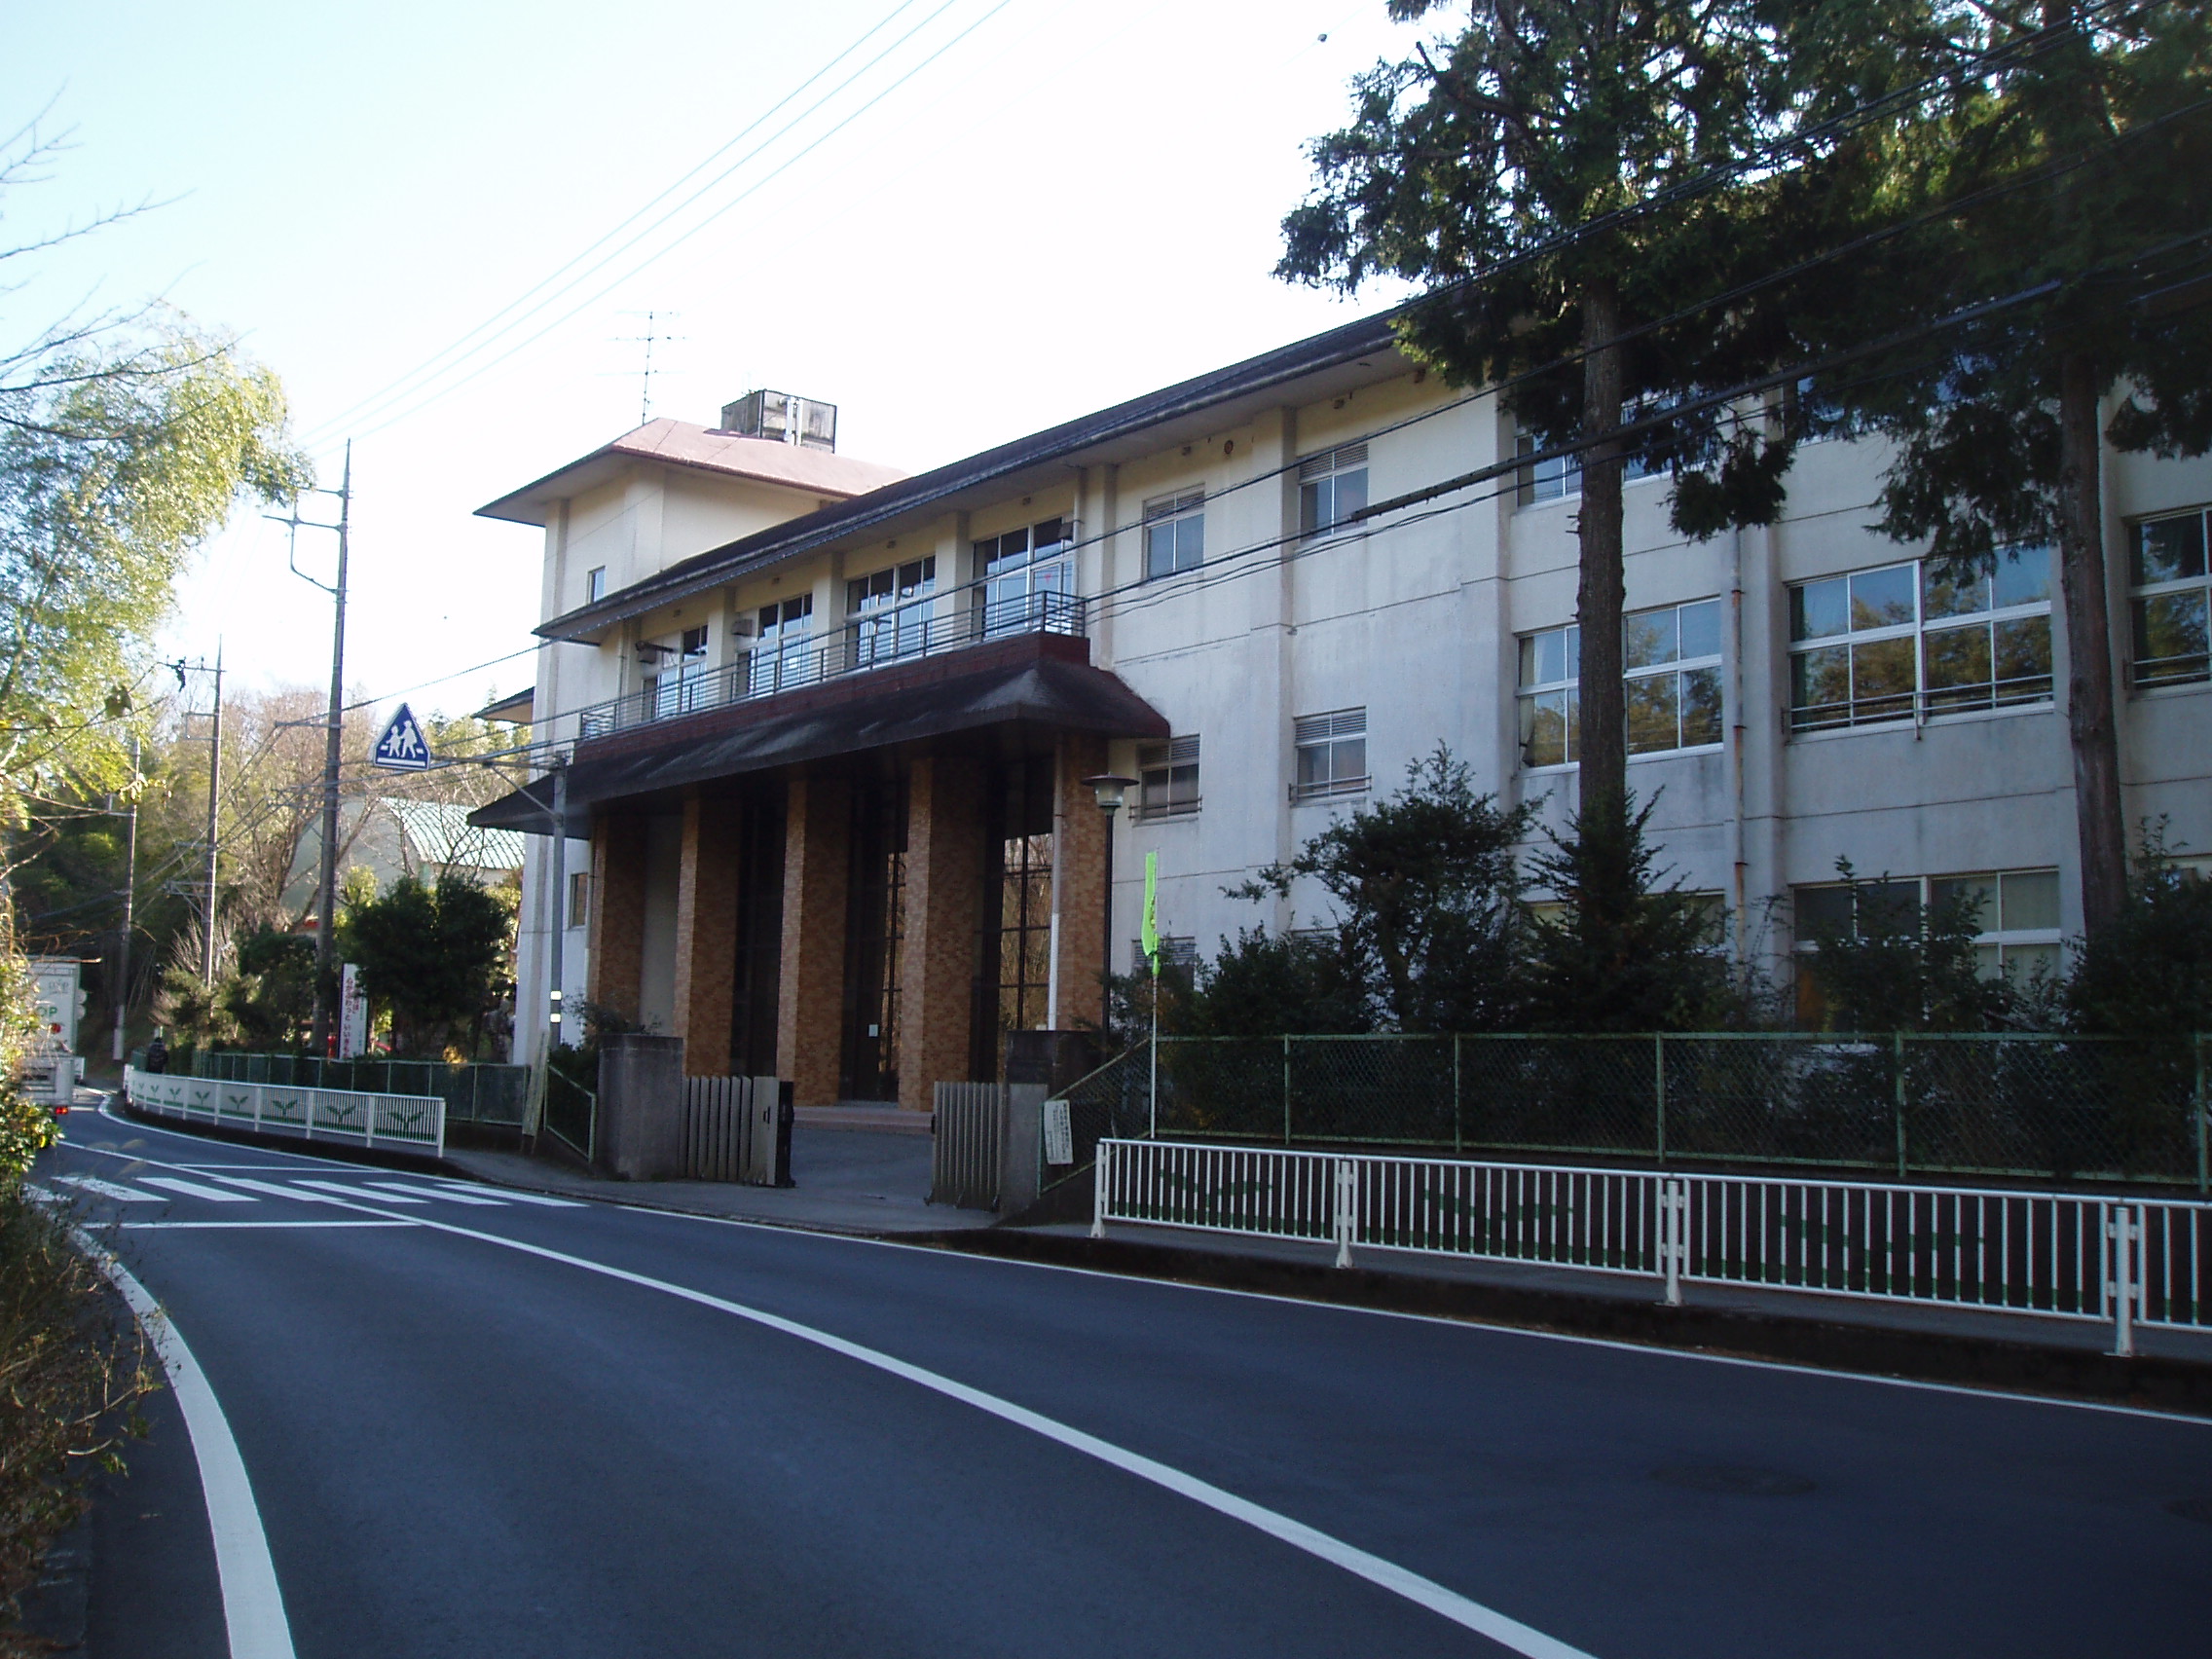 Primary school. 2319m to Ito City Oike elementary school (elementary school)